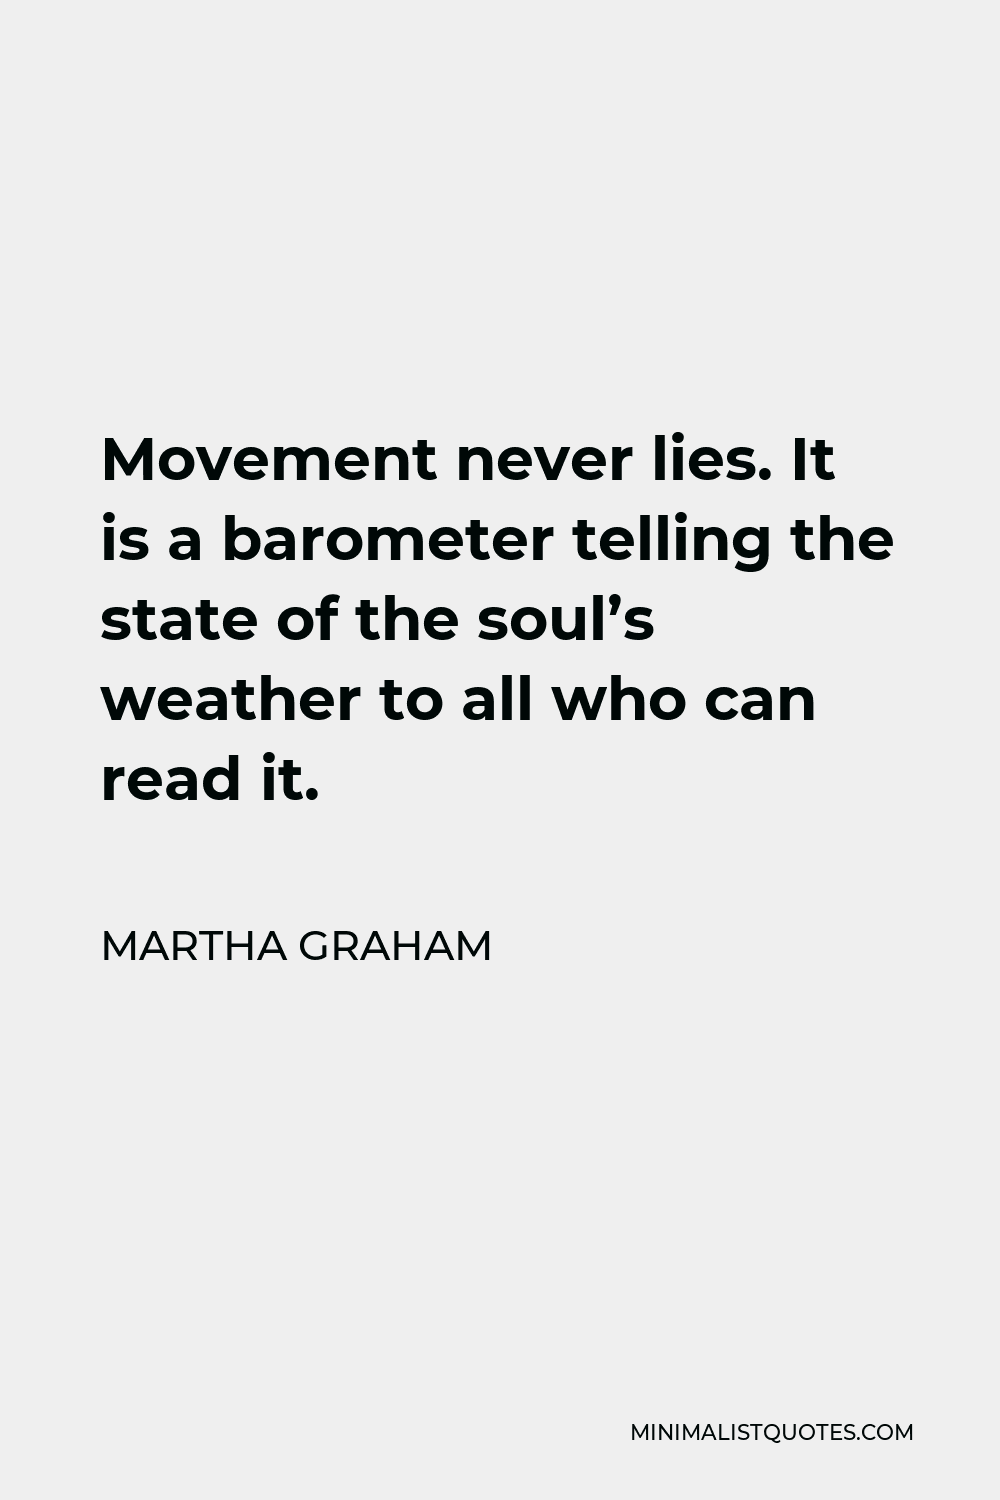 Martha Graham Quote - Movement never lies. It is a barometer telling the state of the soul’s weather to all who can read it.